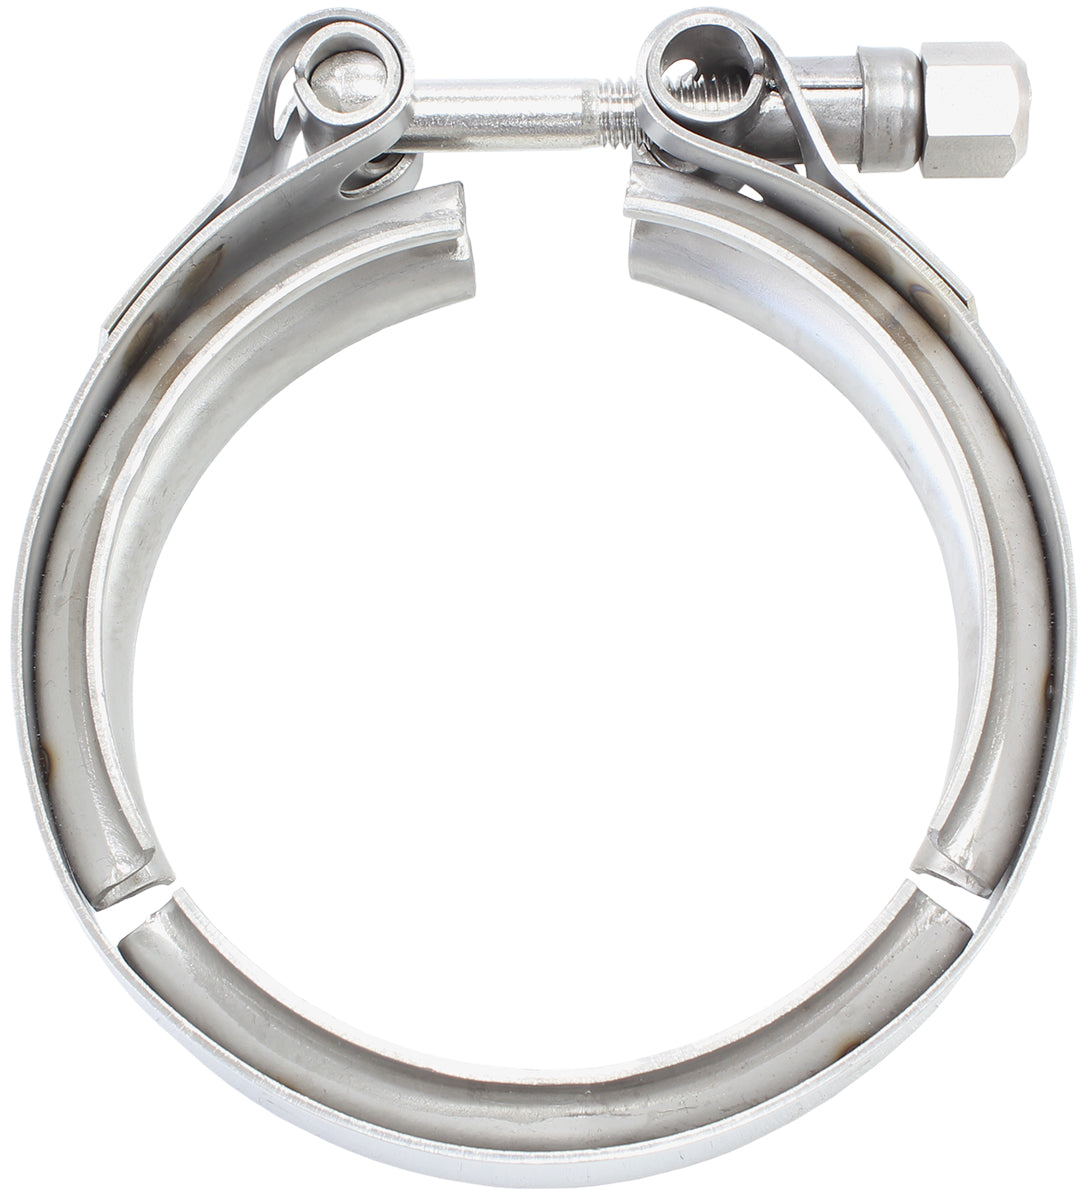 Replacement Stainless Steel V-Band Clamp Aeroflow